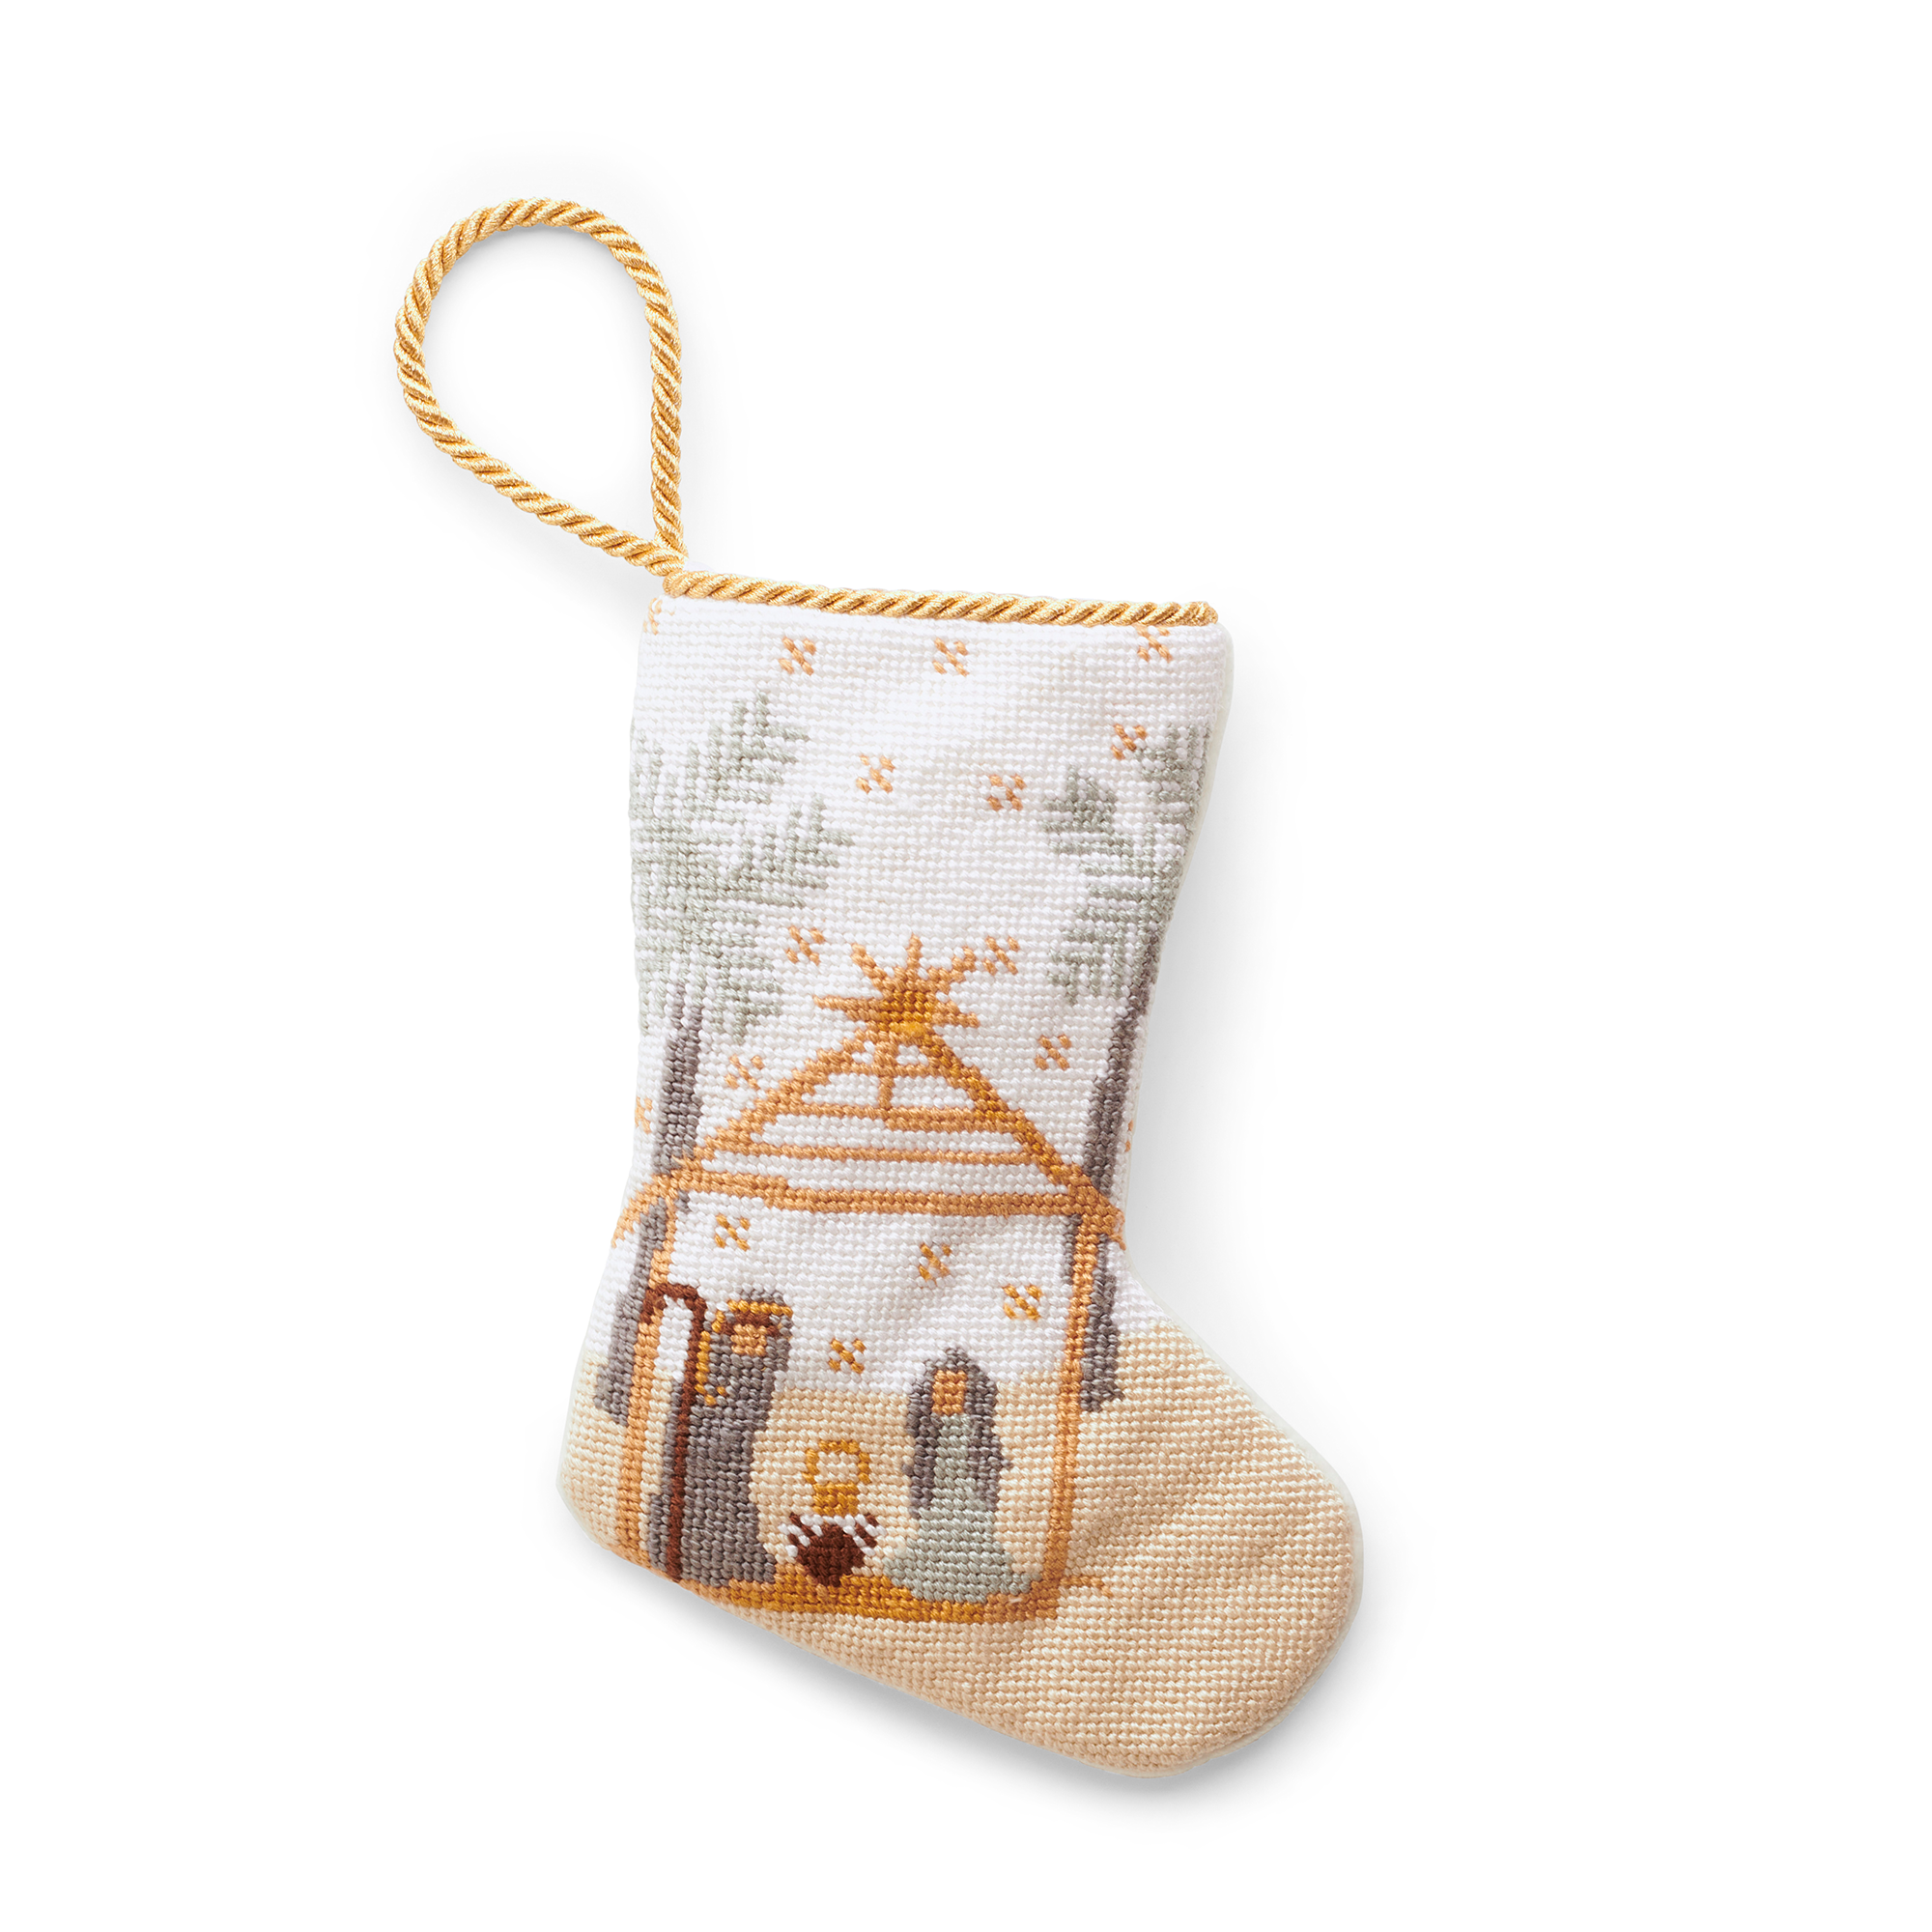 A small, intricately designed needlepoint stocking featuring a nativity scene with the Holy Family, set against a bright sky. A gold loop at the top makes it perfect as a tree ornament, place setting, or for hanging by the fireplace.